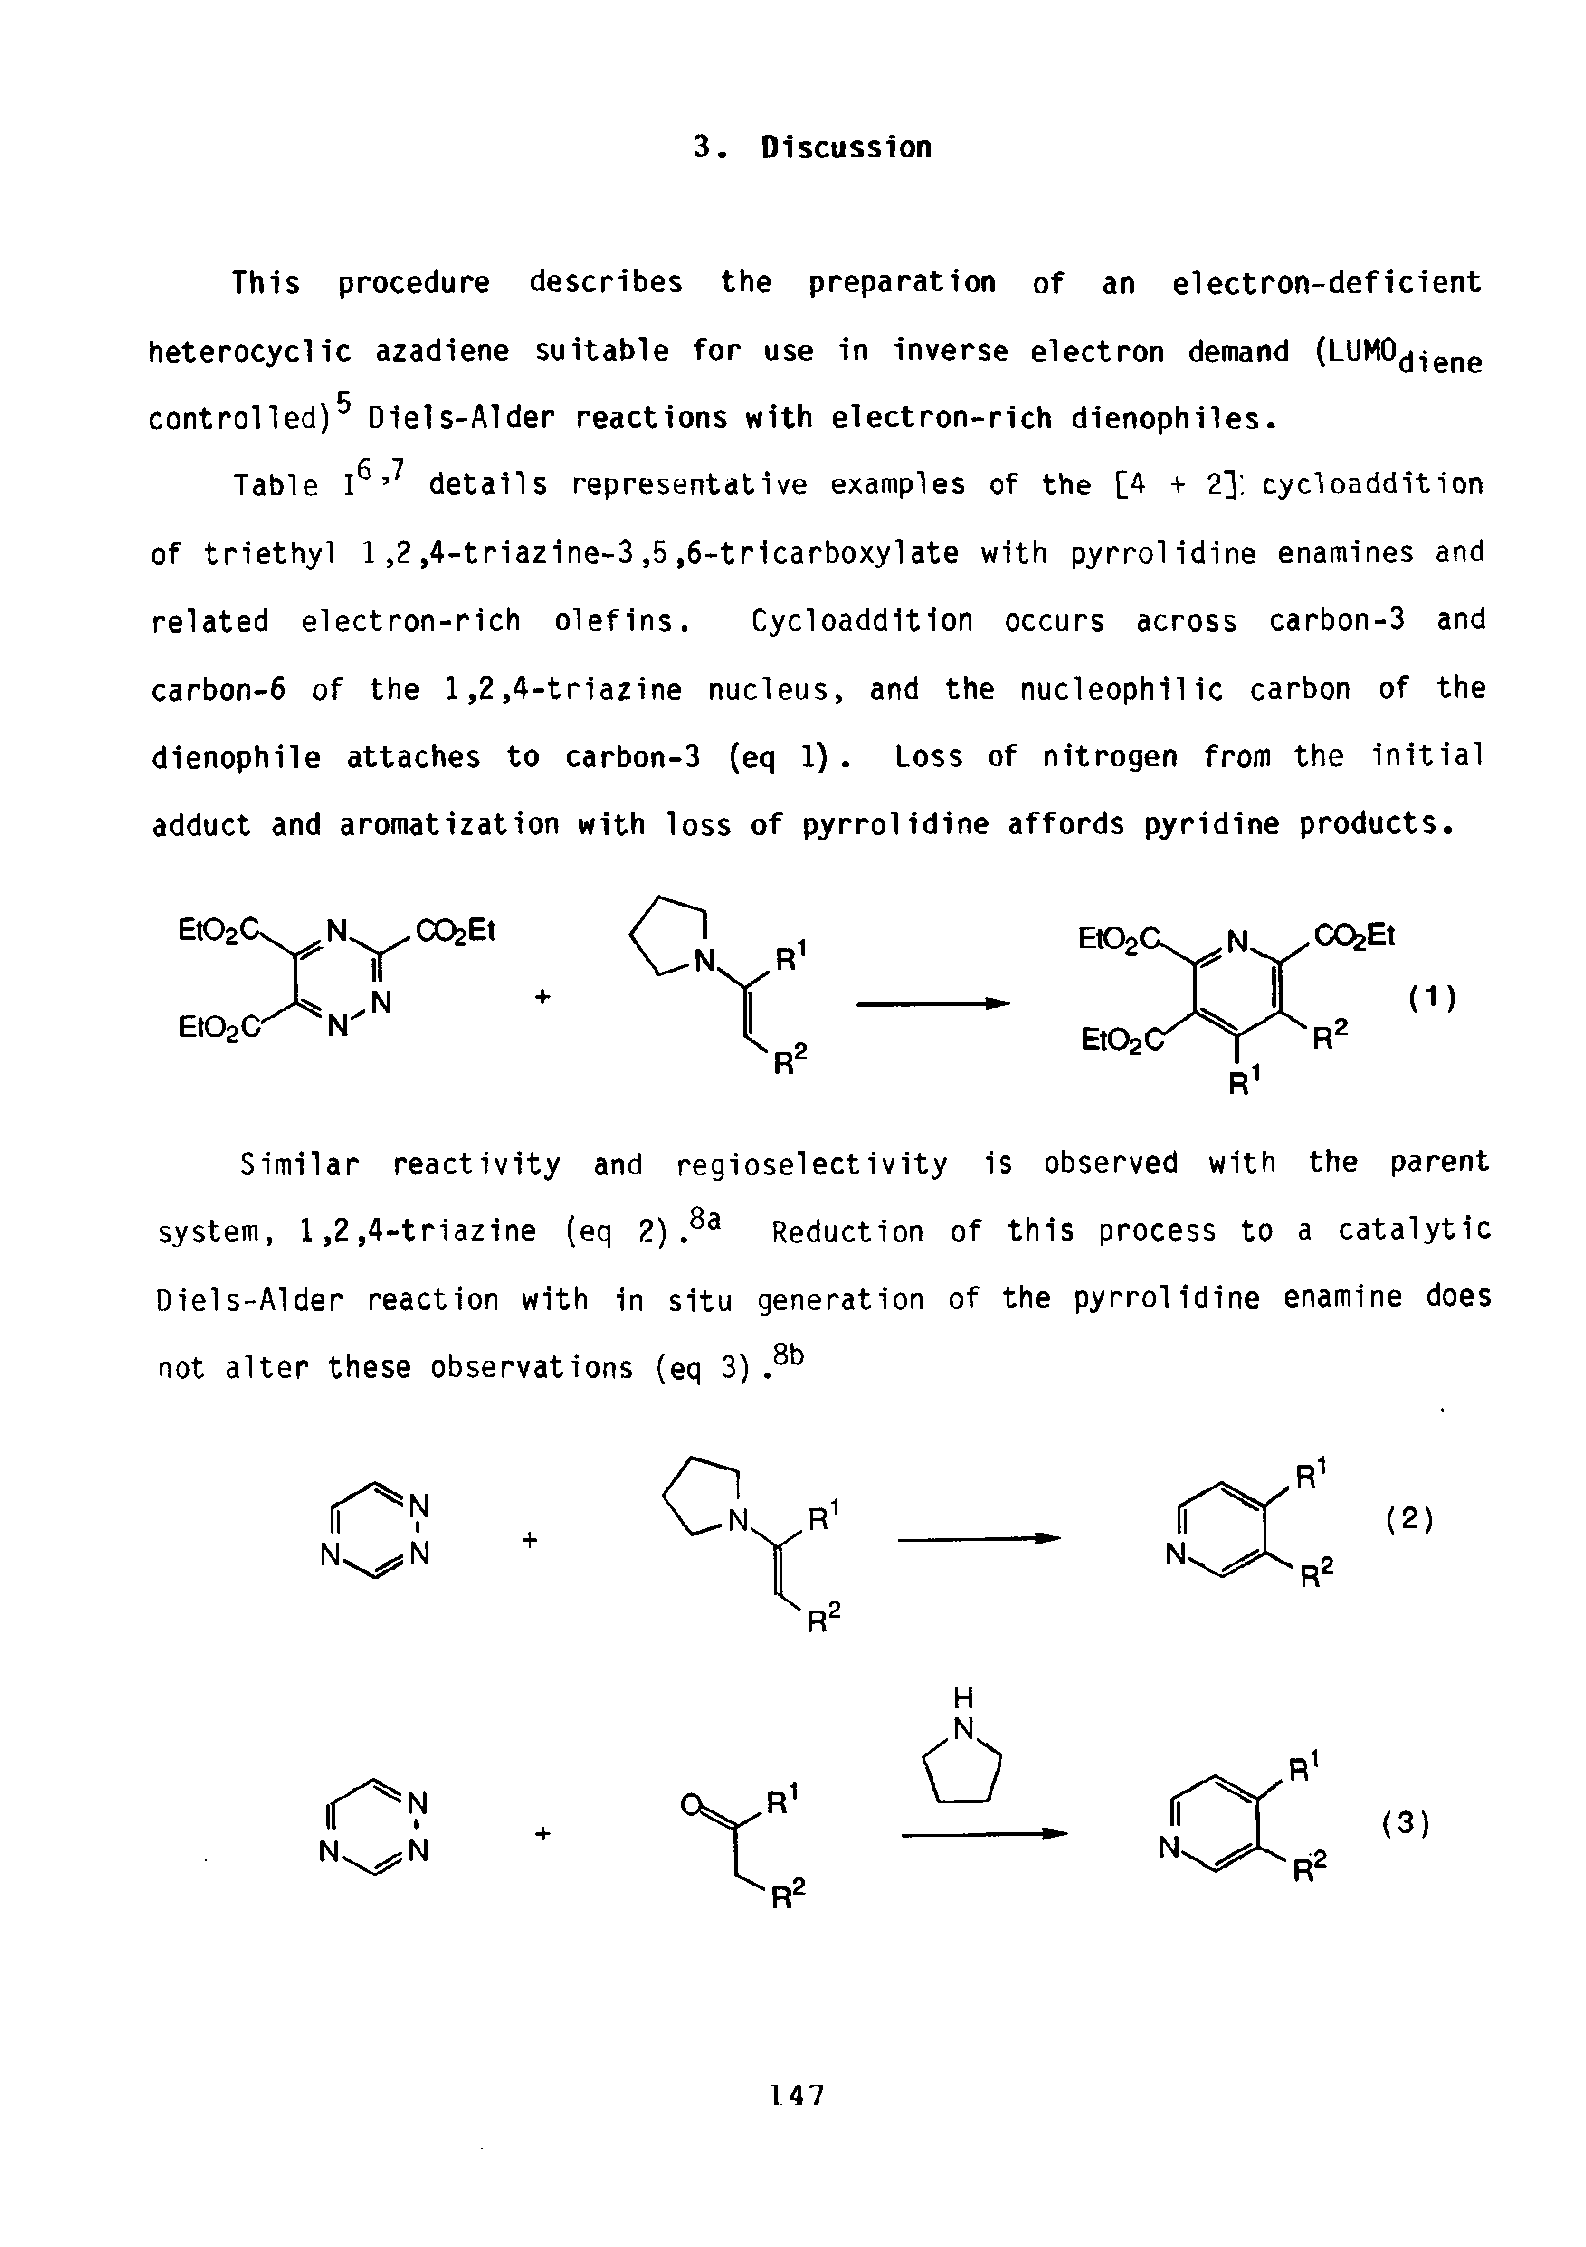 Table I details representative examples of the [4 + 2] cycloaddition of triethyl 1,2, 4-triazine-3,5,6-tricarboxylate with pyrrolidine enamines and related electron-rich olefins. Cycloaddition occurs across carbon-3 and carbon-6 of the 1,2,4-triazine nucleus, and the nucleophilic carbon of the dienophile attaches to carbon-3 (eq 1). Loss of nitrogen from the initial adduct and aromatization with loss of pyrrolidine affords pyridine products.